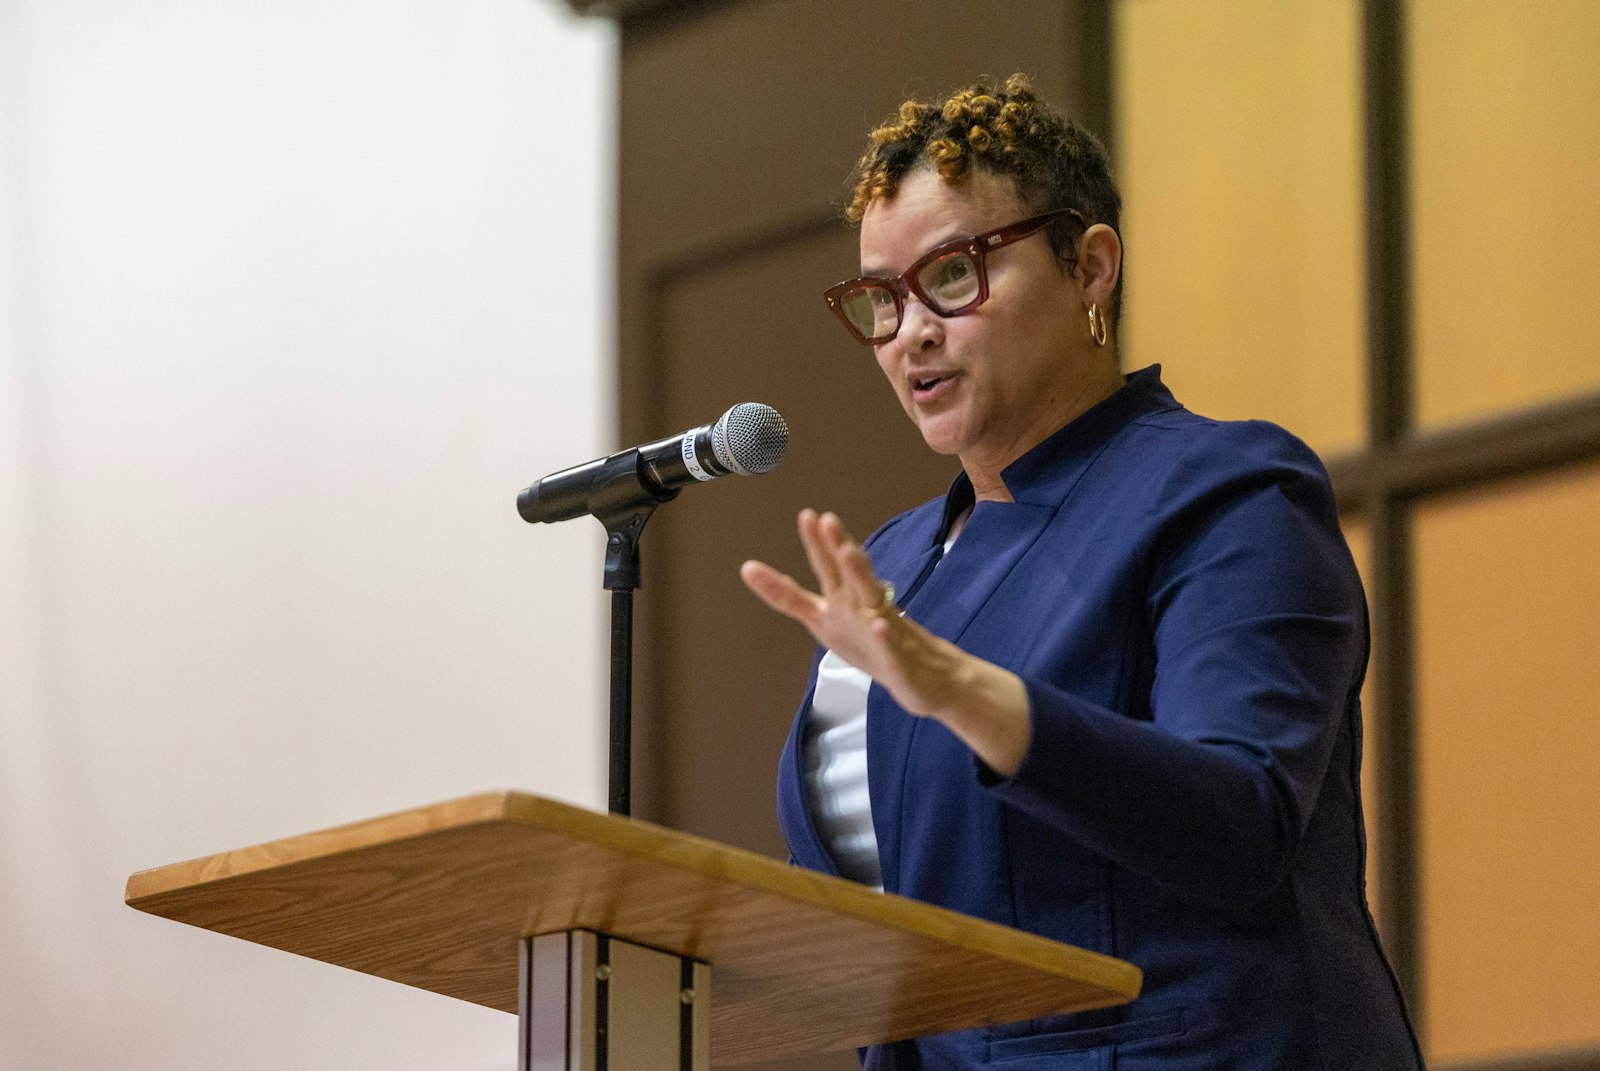 Angela L. Swain, Ph.D., director of the Office of Human Dignity and Solidarity for the Archdiocese of Chicago, delivers the keynote address during the 2023 Black Catholic Women's Conference at Sacred Heart Major Seminary.